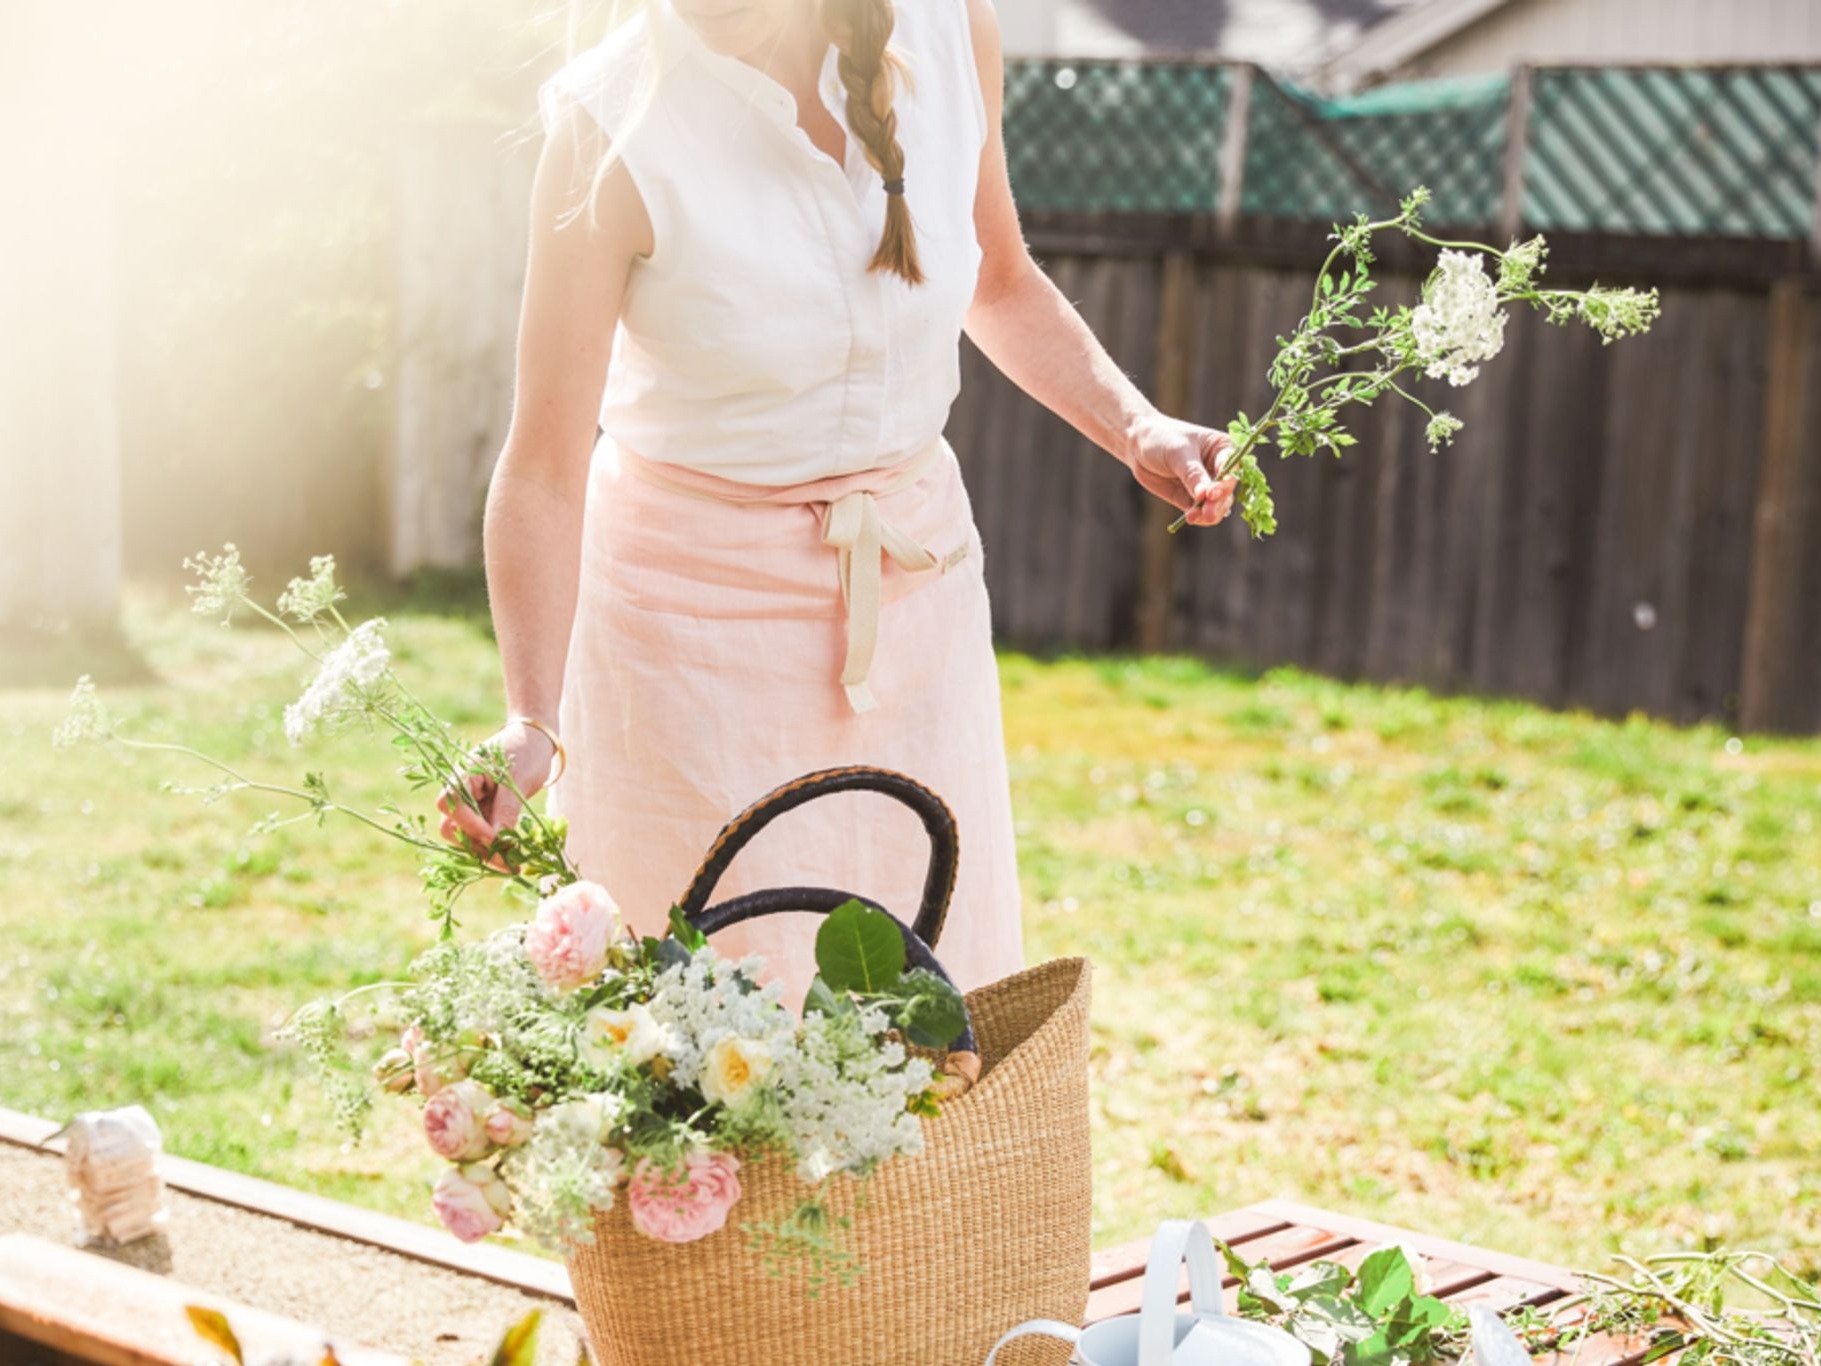 Photo of woman in yard putting flowers in basket